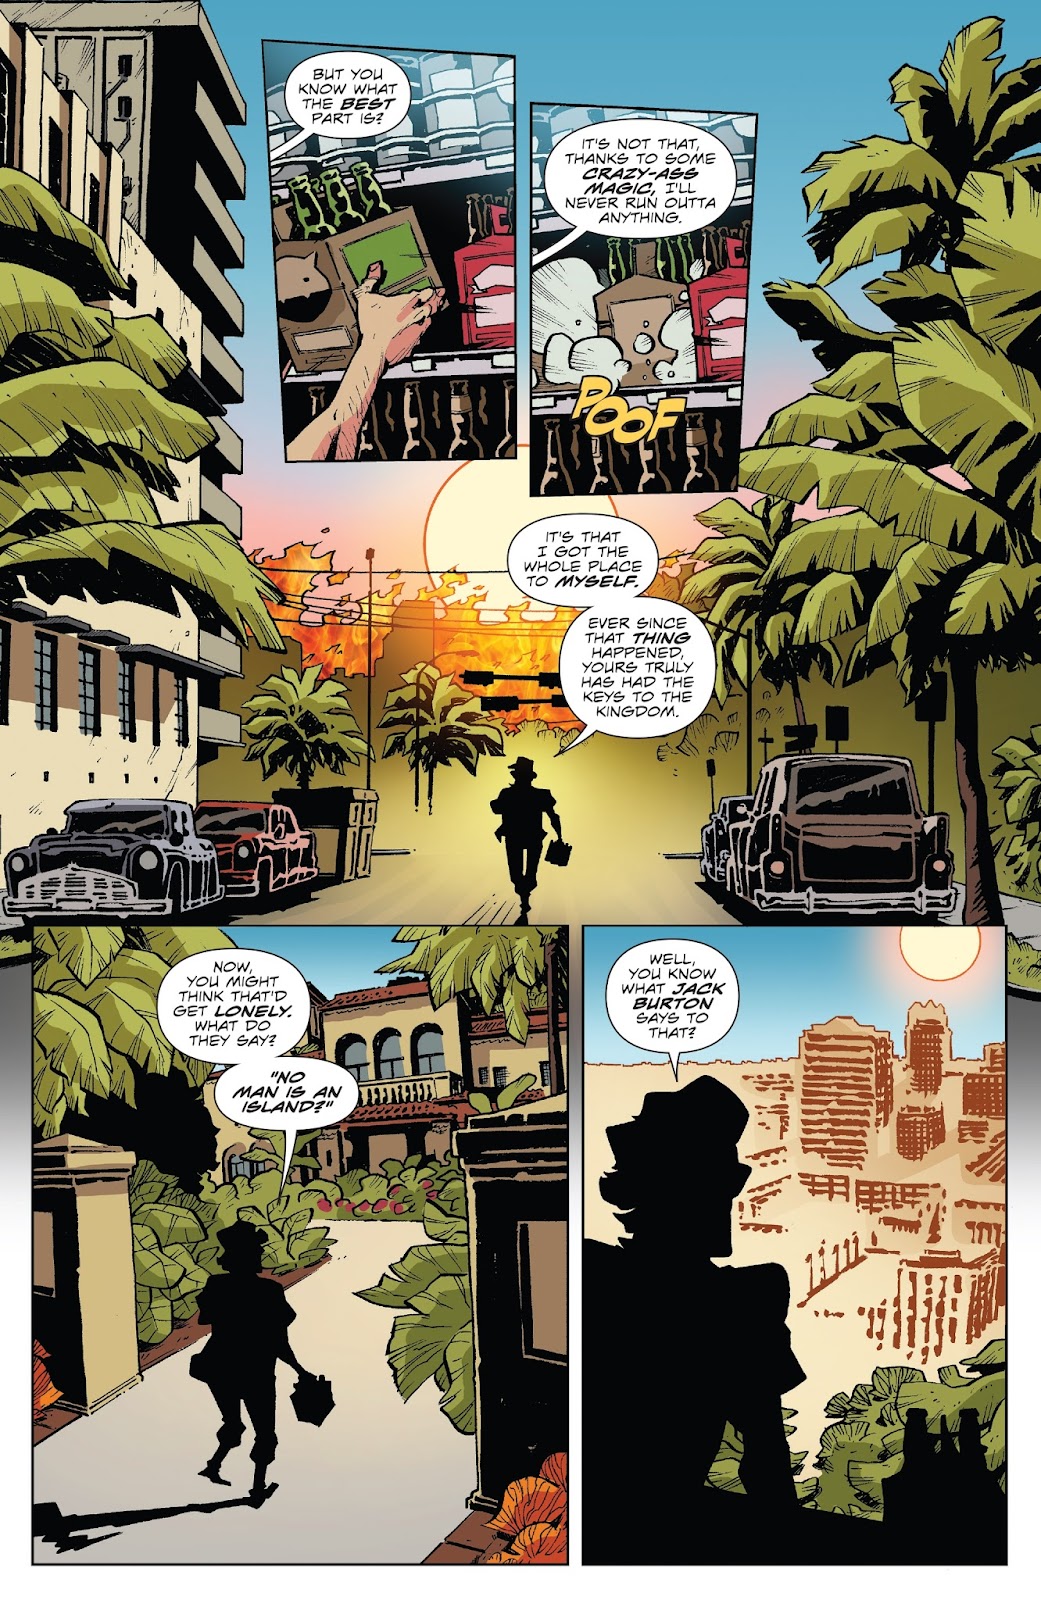 Big Trouble in Little China: Old Man Jack issue 1 - Page 5